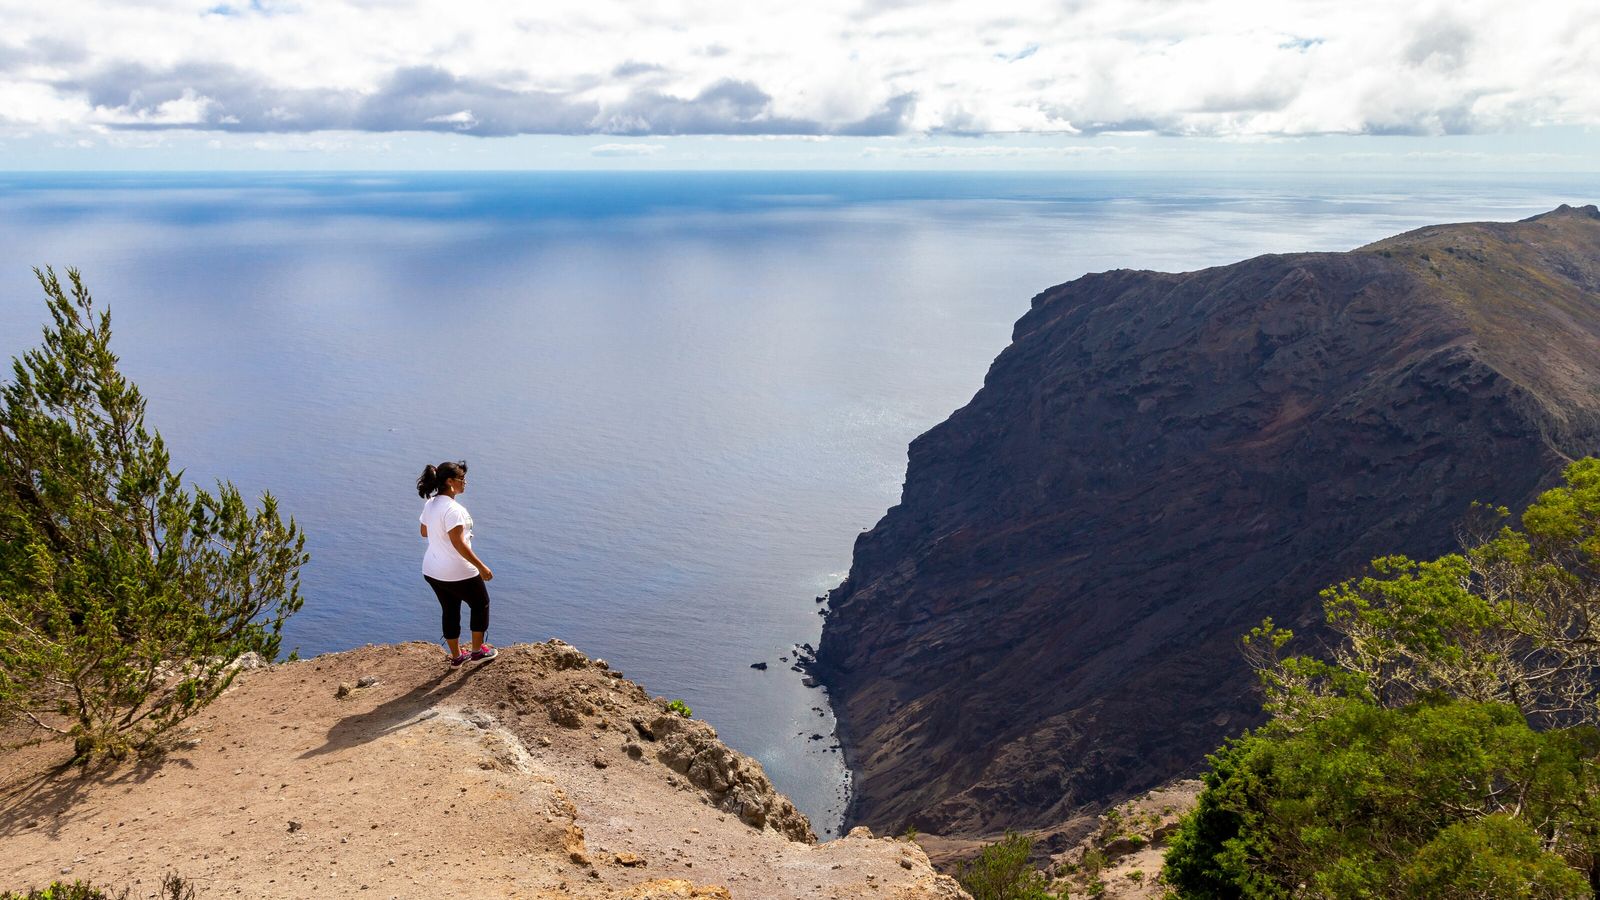 The Remote And Beautiful: 10 Reasons To Visit St Helena